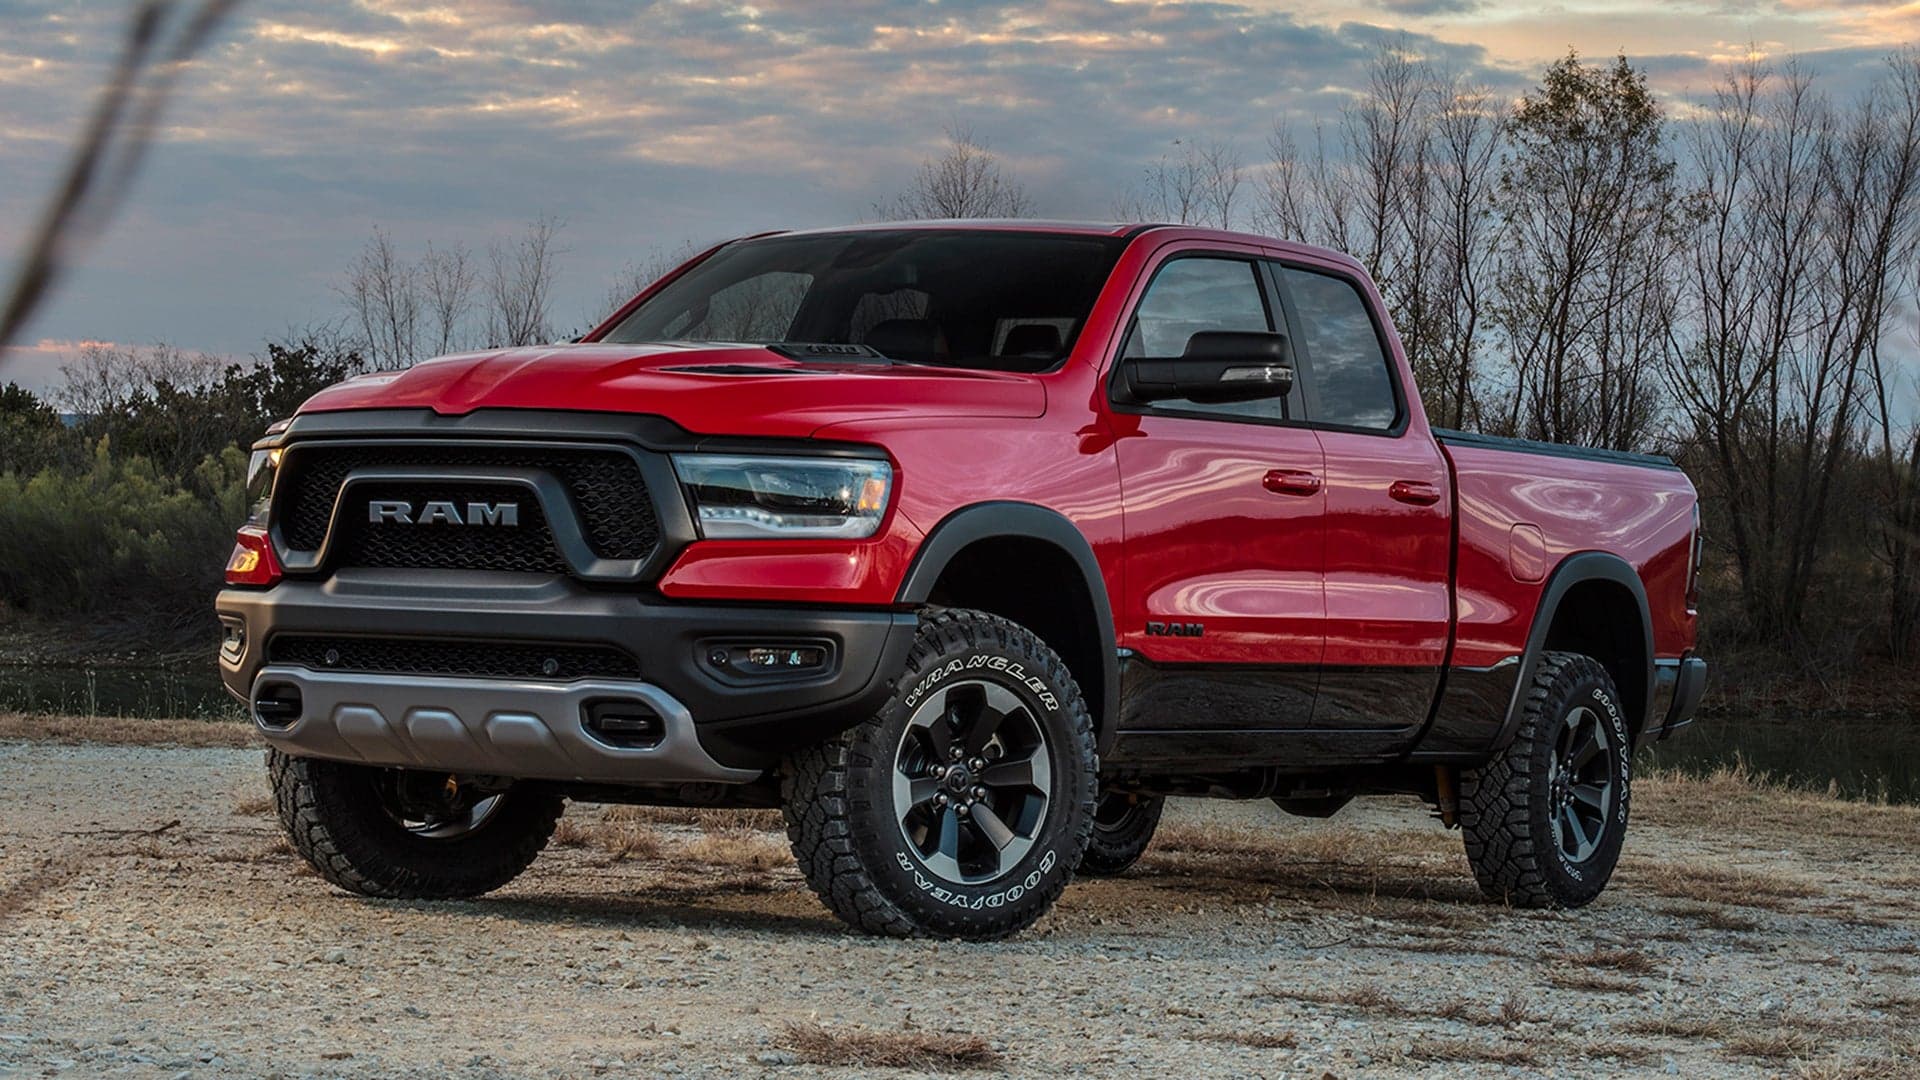 2019 Ram 1500 Rebel Quad Cab Review: A Solid Pickup Truck, Held Back Only By Our Expectations